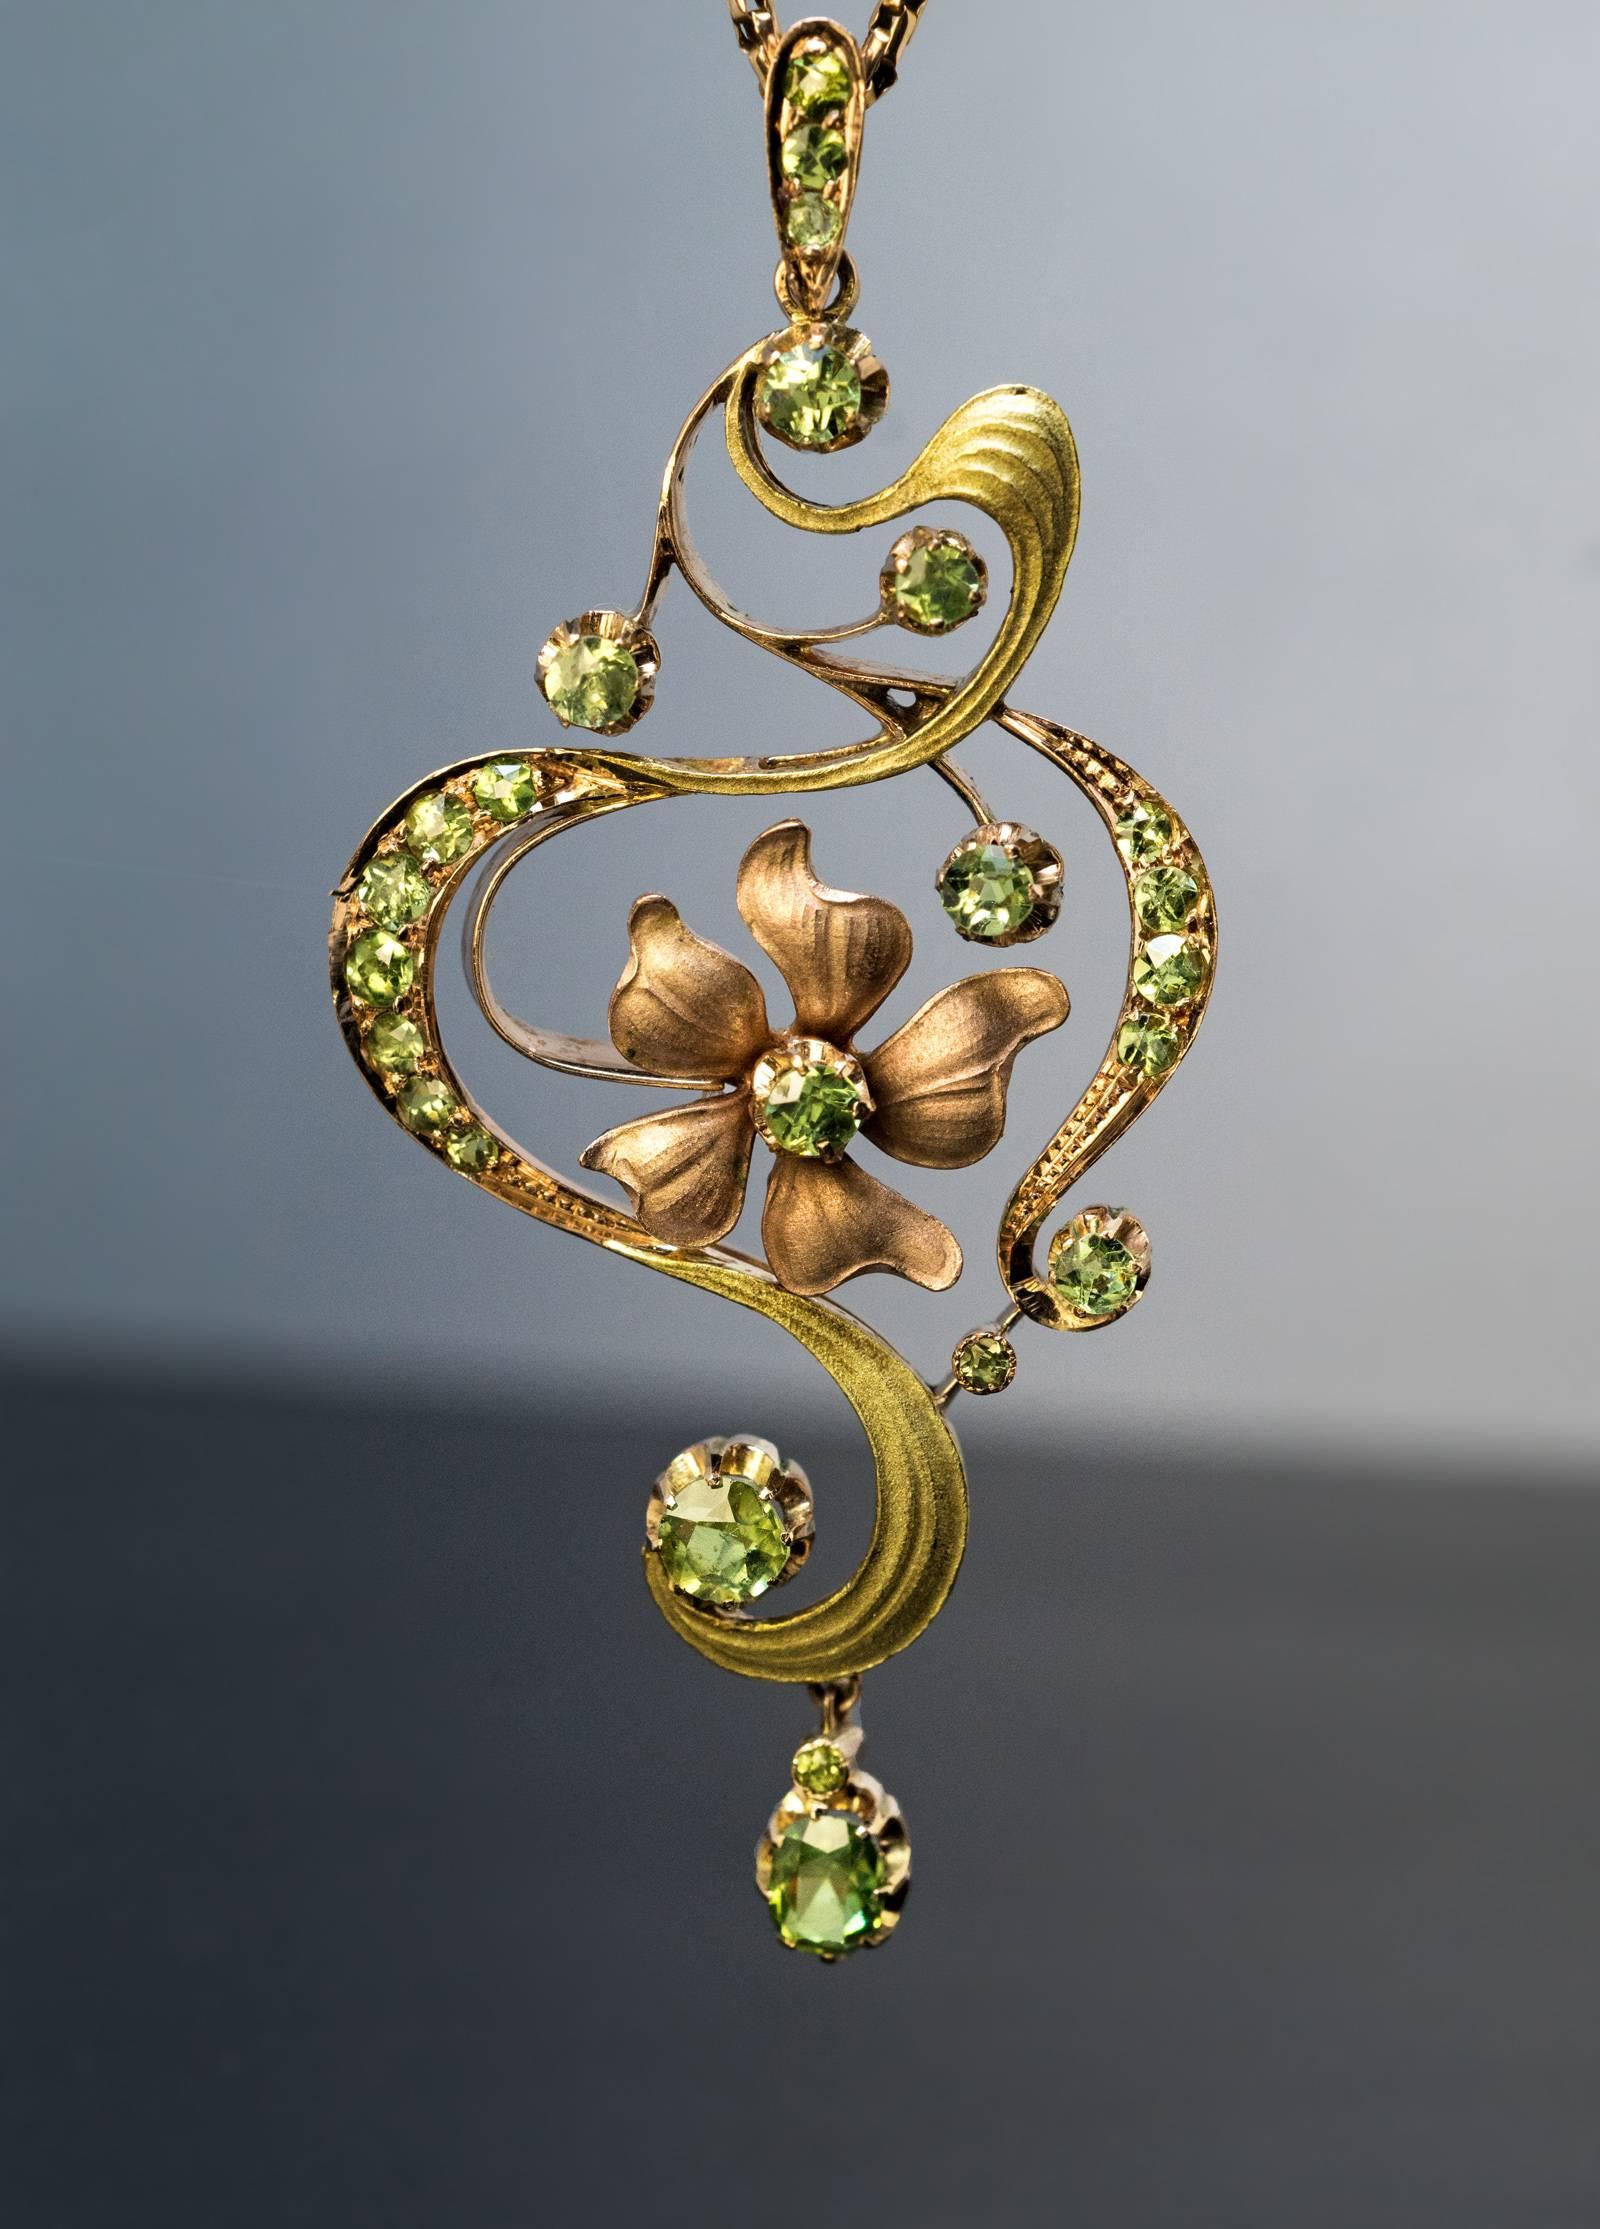 Made in Moscow between 1899 and 1908

An antique 14K rose and green gold pendant is designed in Art Nouveau taste as a stylized flower. The pendant is embellished with sparkling bright apple green Russian demantoid garnets.

The pendant is marked